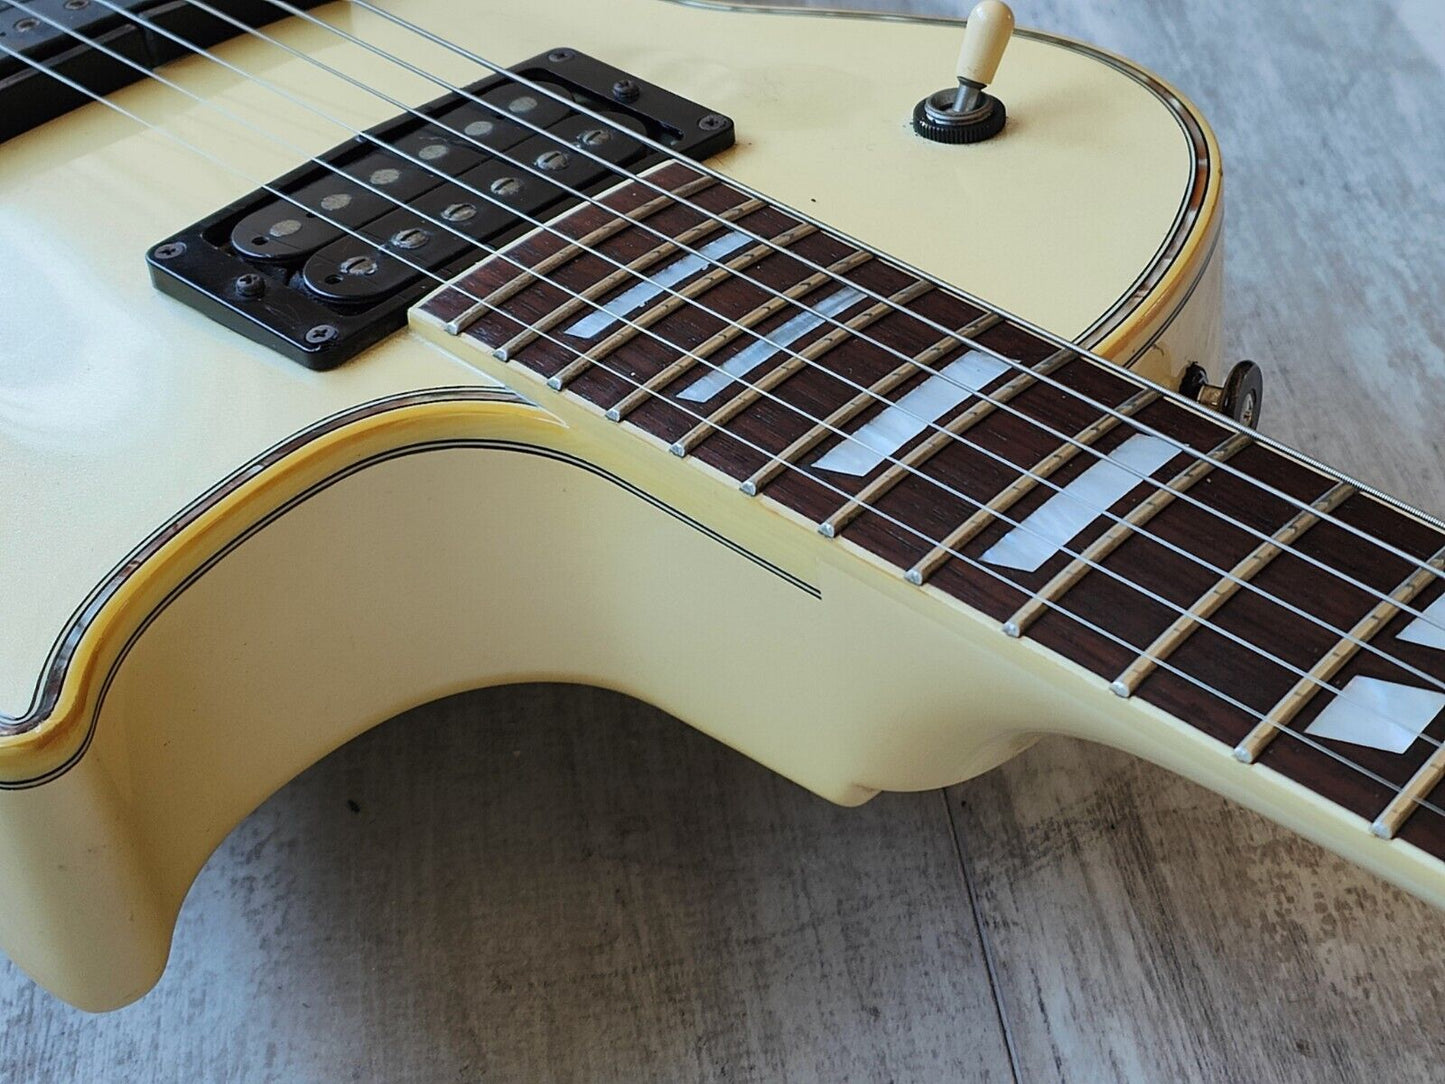 1997 Greco Japan LG-70 Eclipse Style Les Paul (Pearl White)